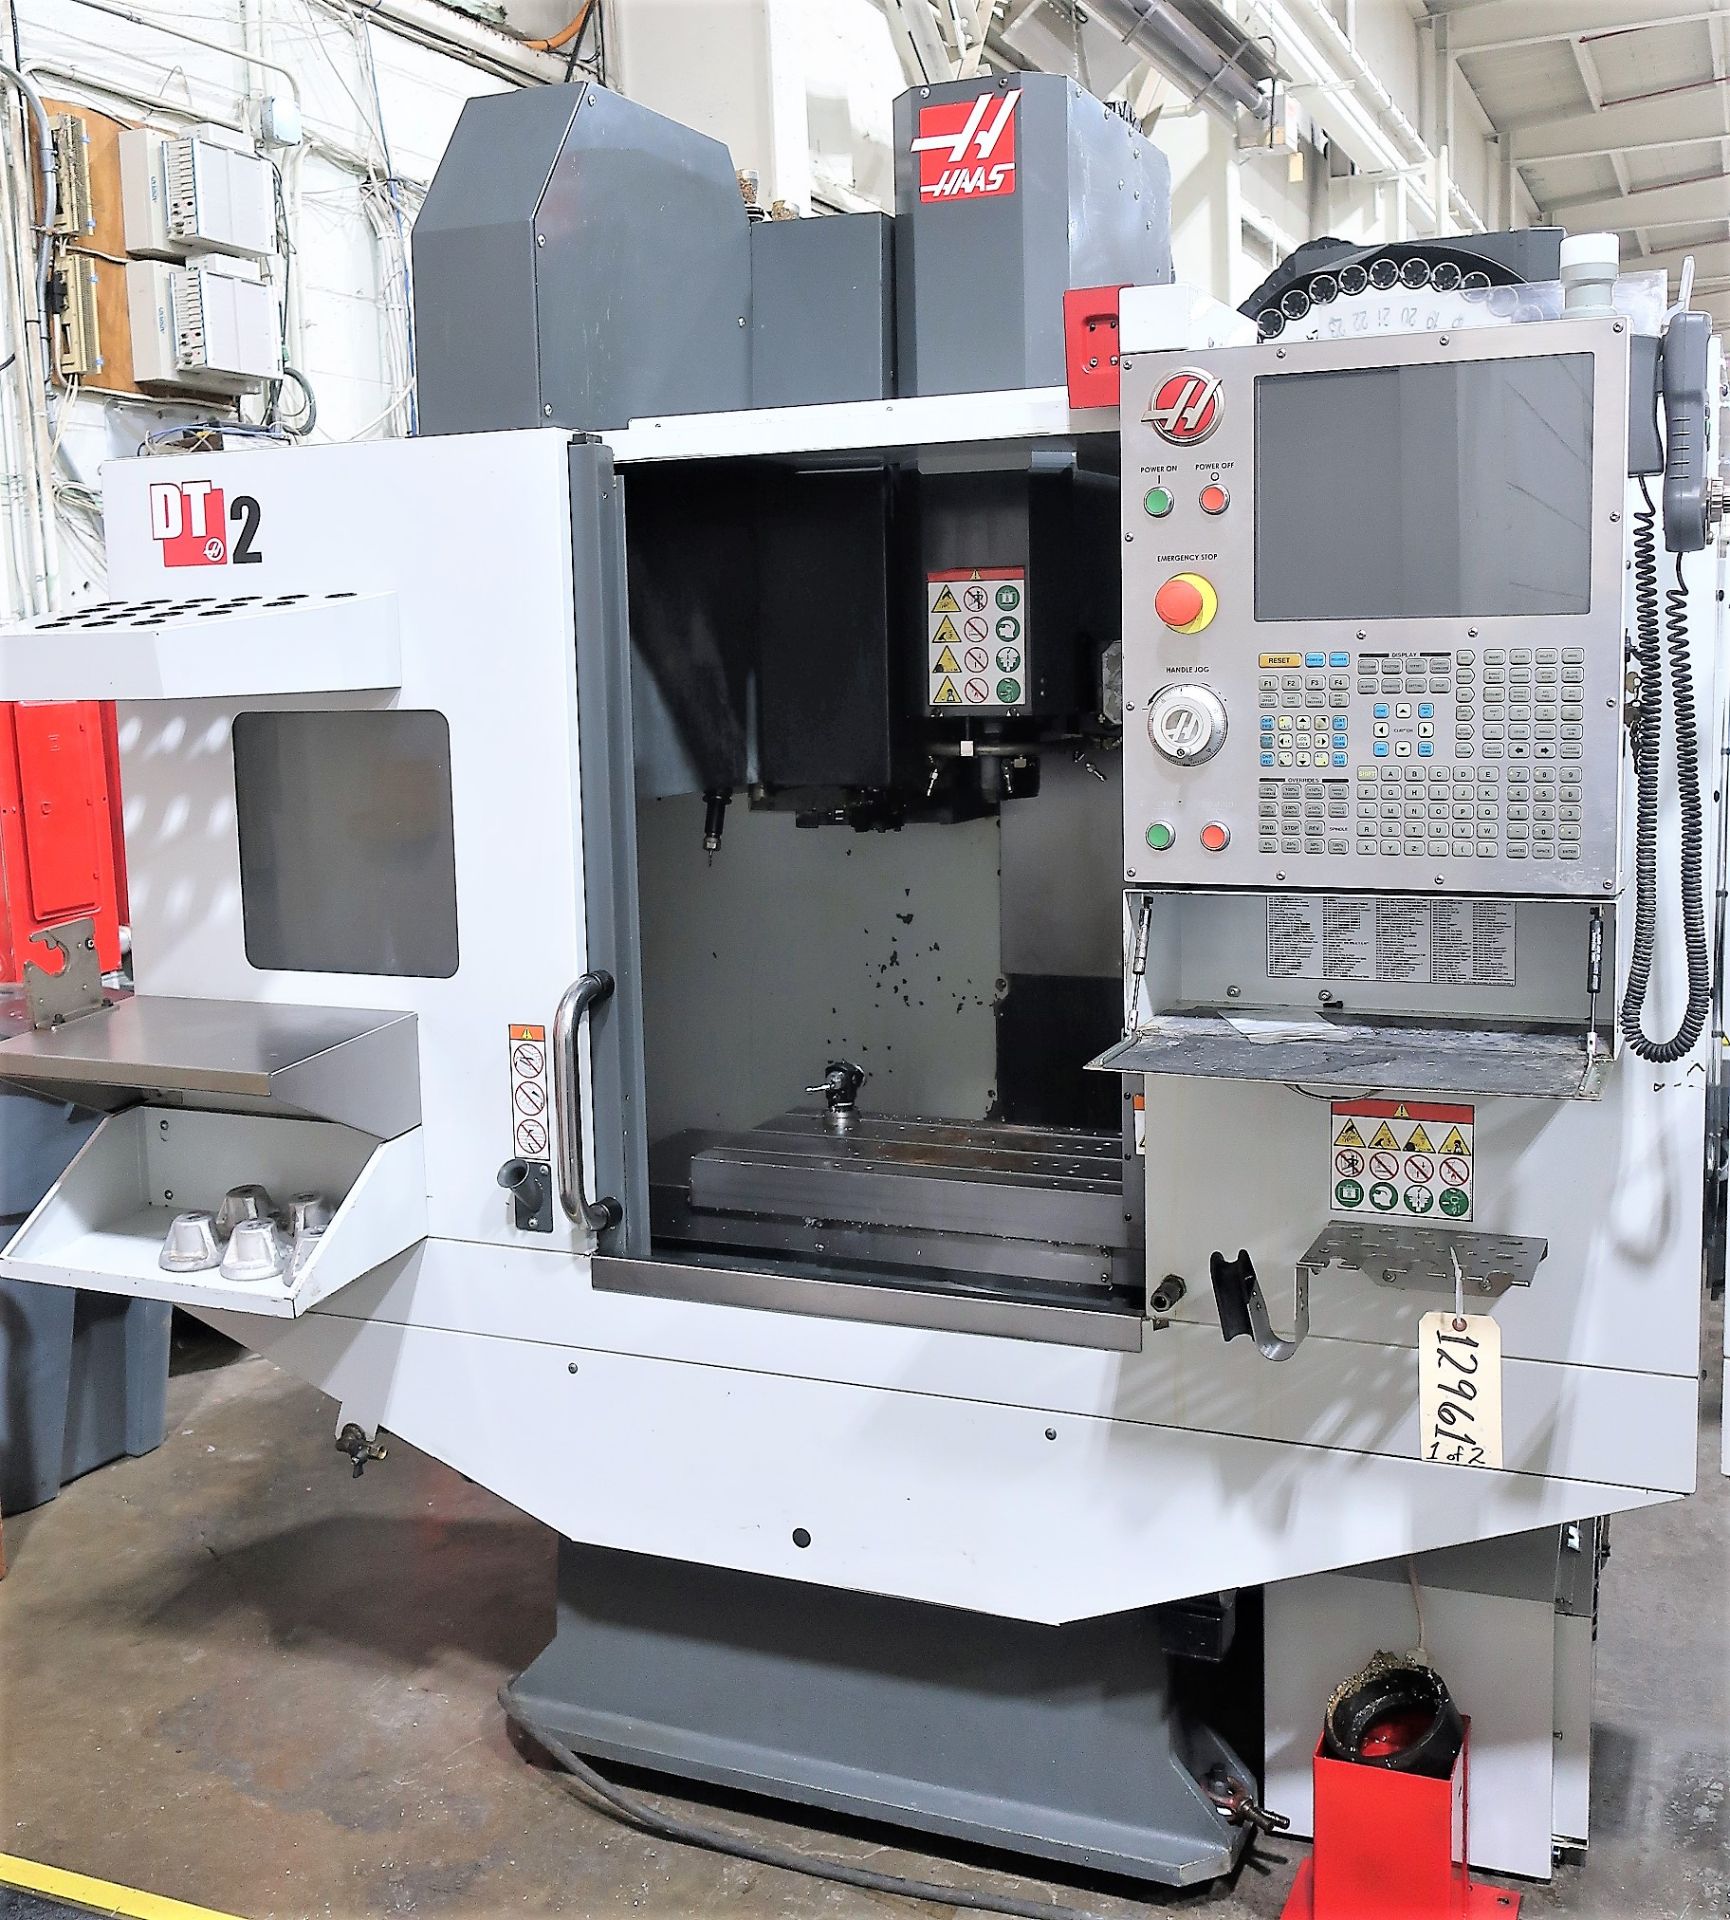 Haas DT-2 4-Axis CNC Dri//Tap Mill Vertical Machining Center, S/N 1135274, New 2016